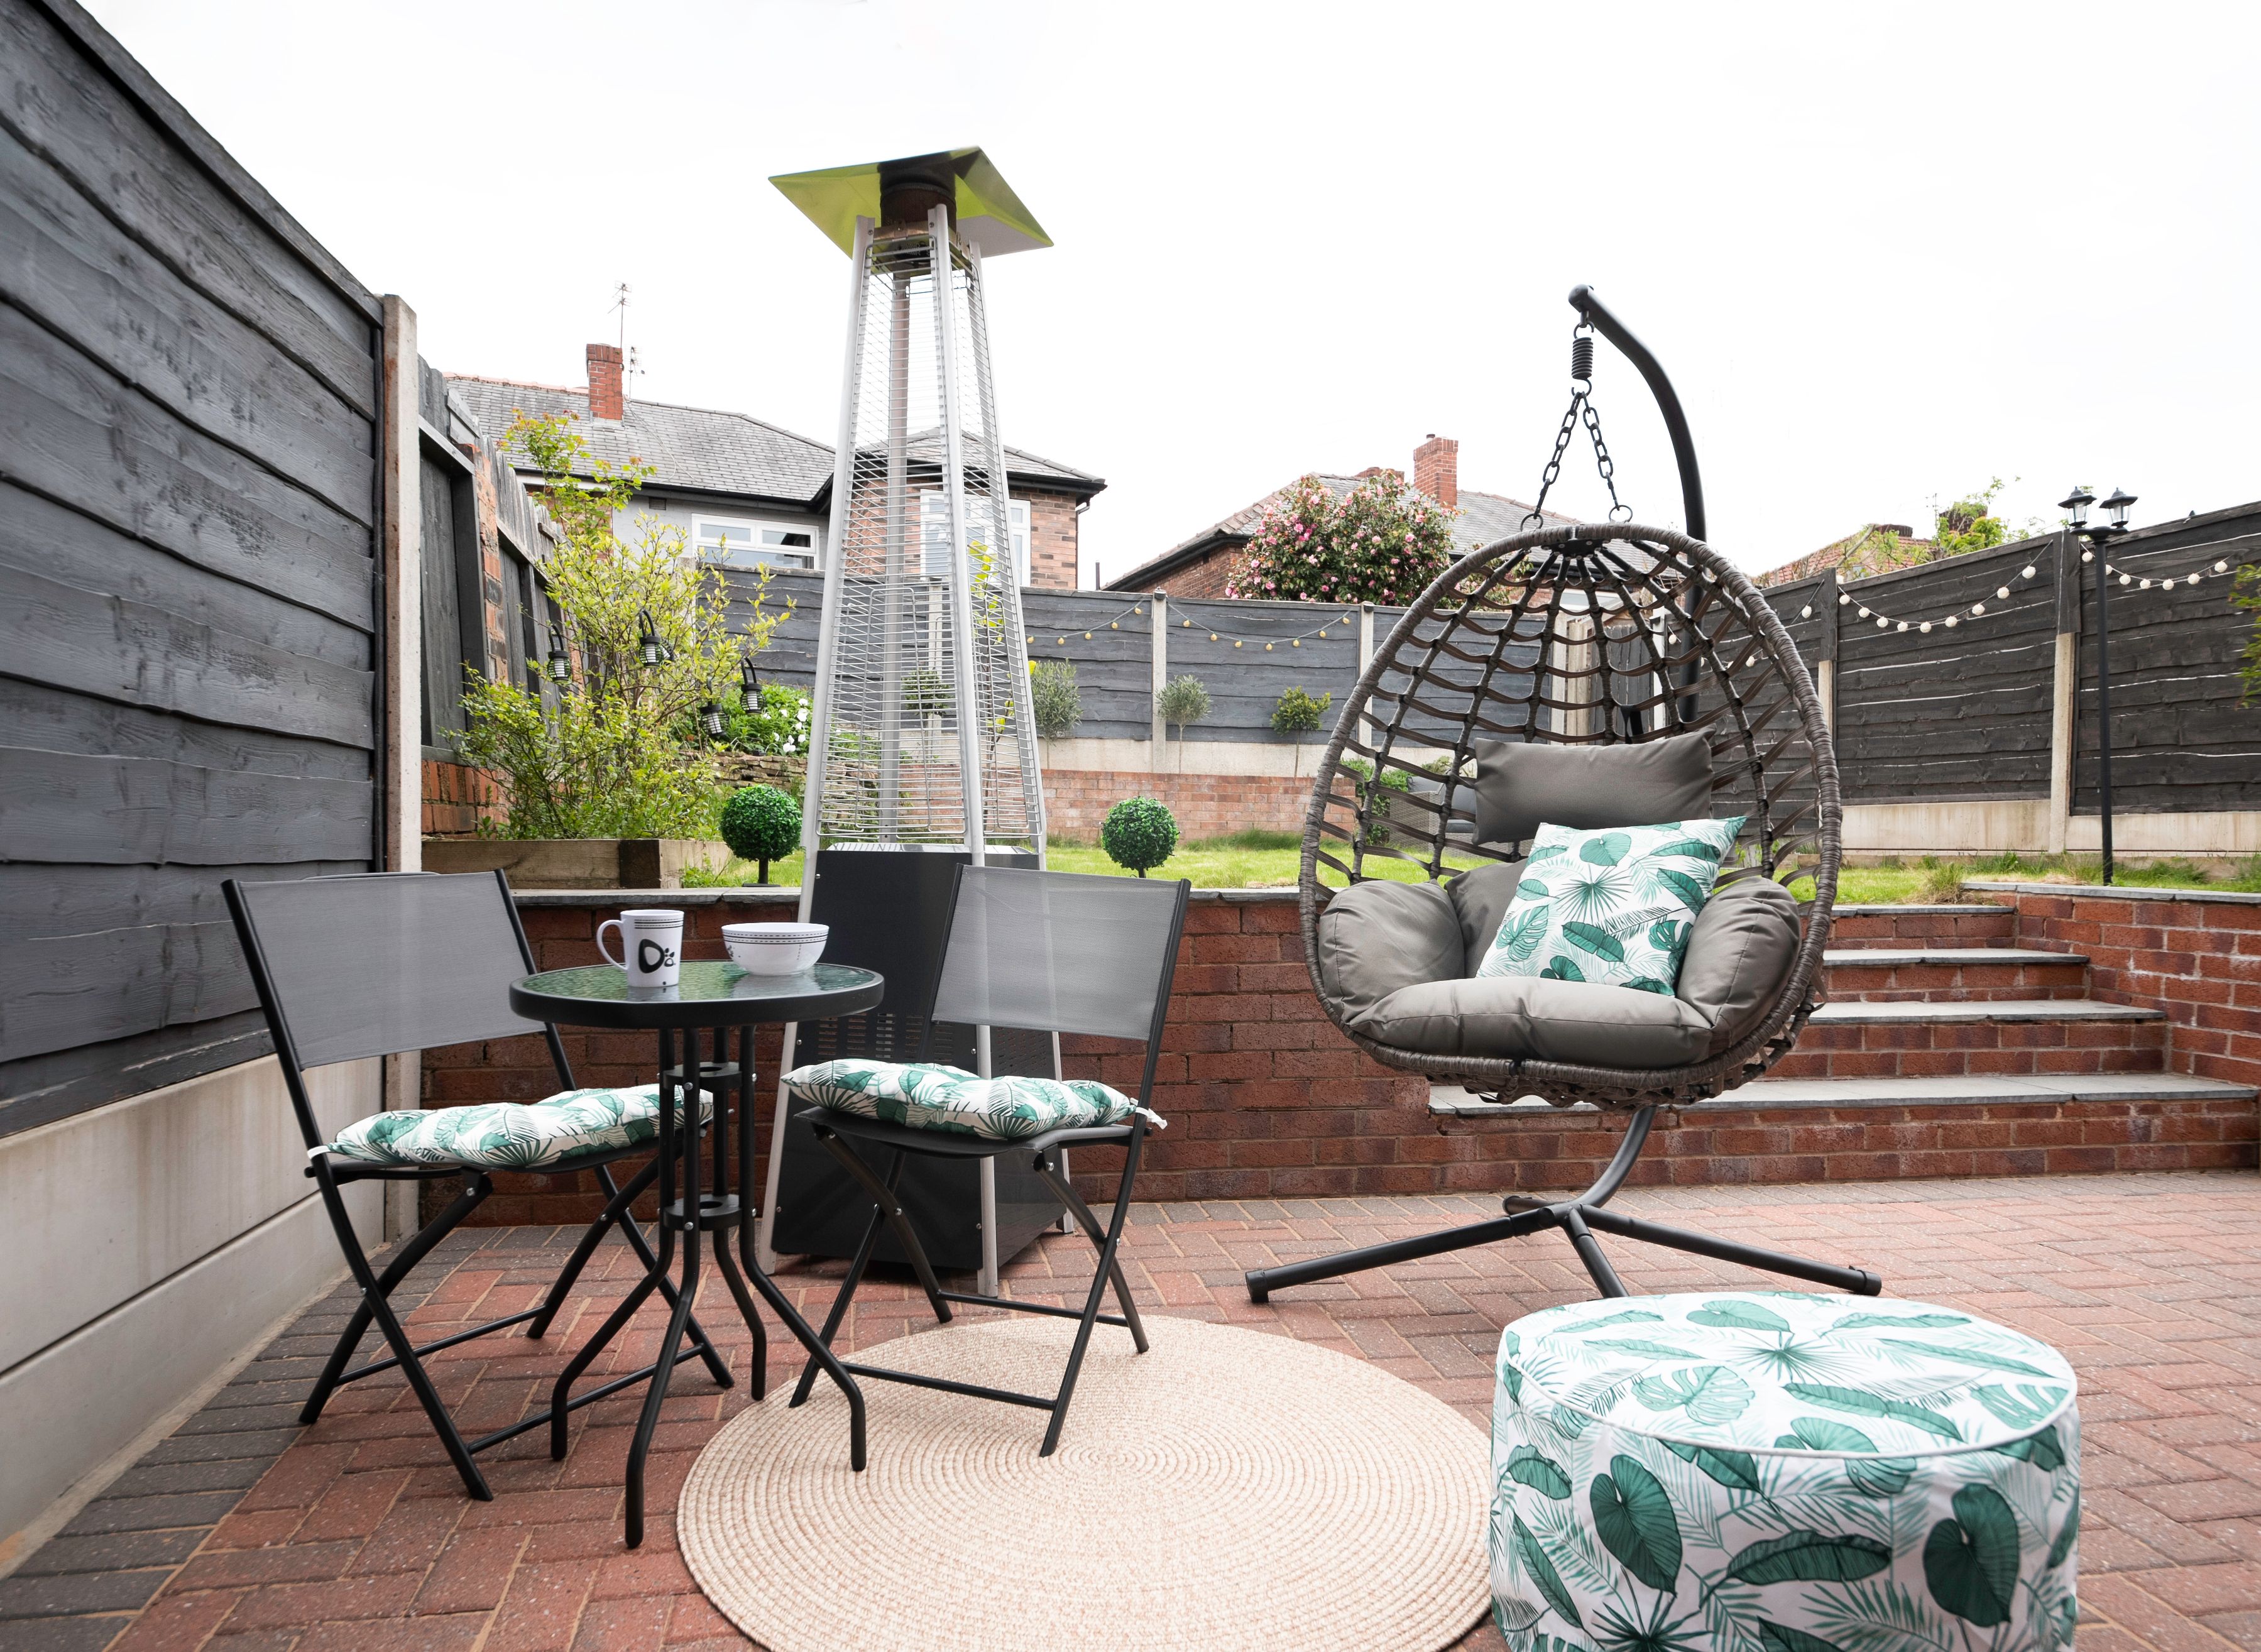 Streetwize Introduces New Collection of Soft Garden Furnishings